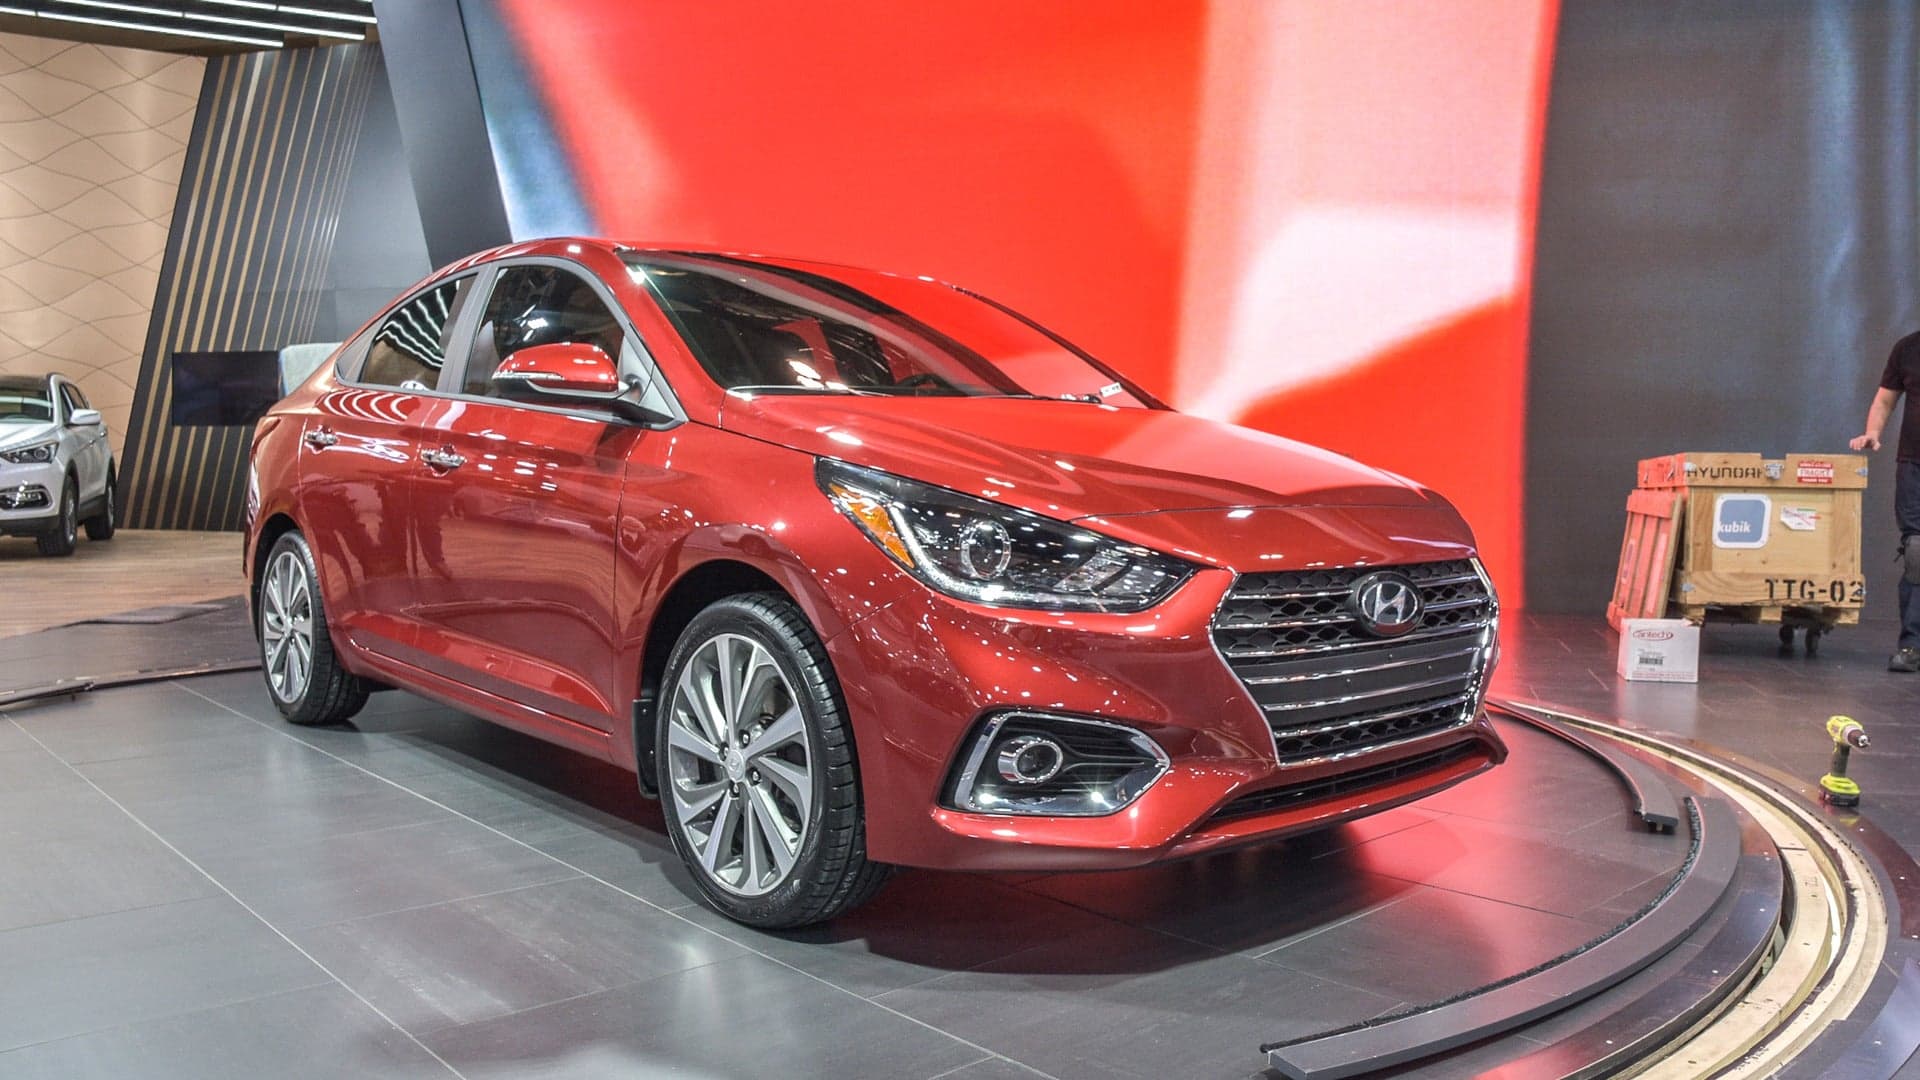 2018 Hyundai Accent Revealed at Canadian International Auto Show